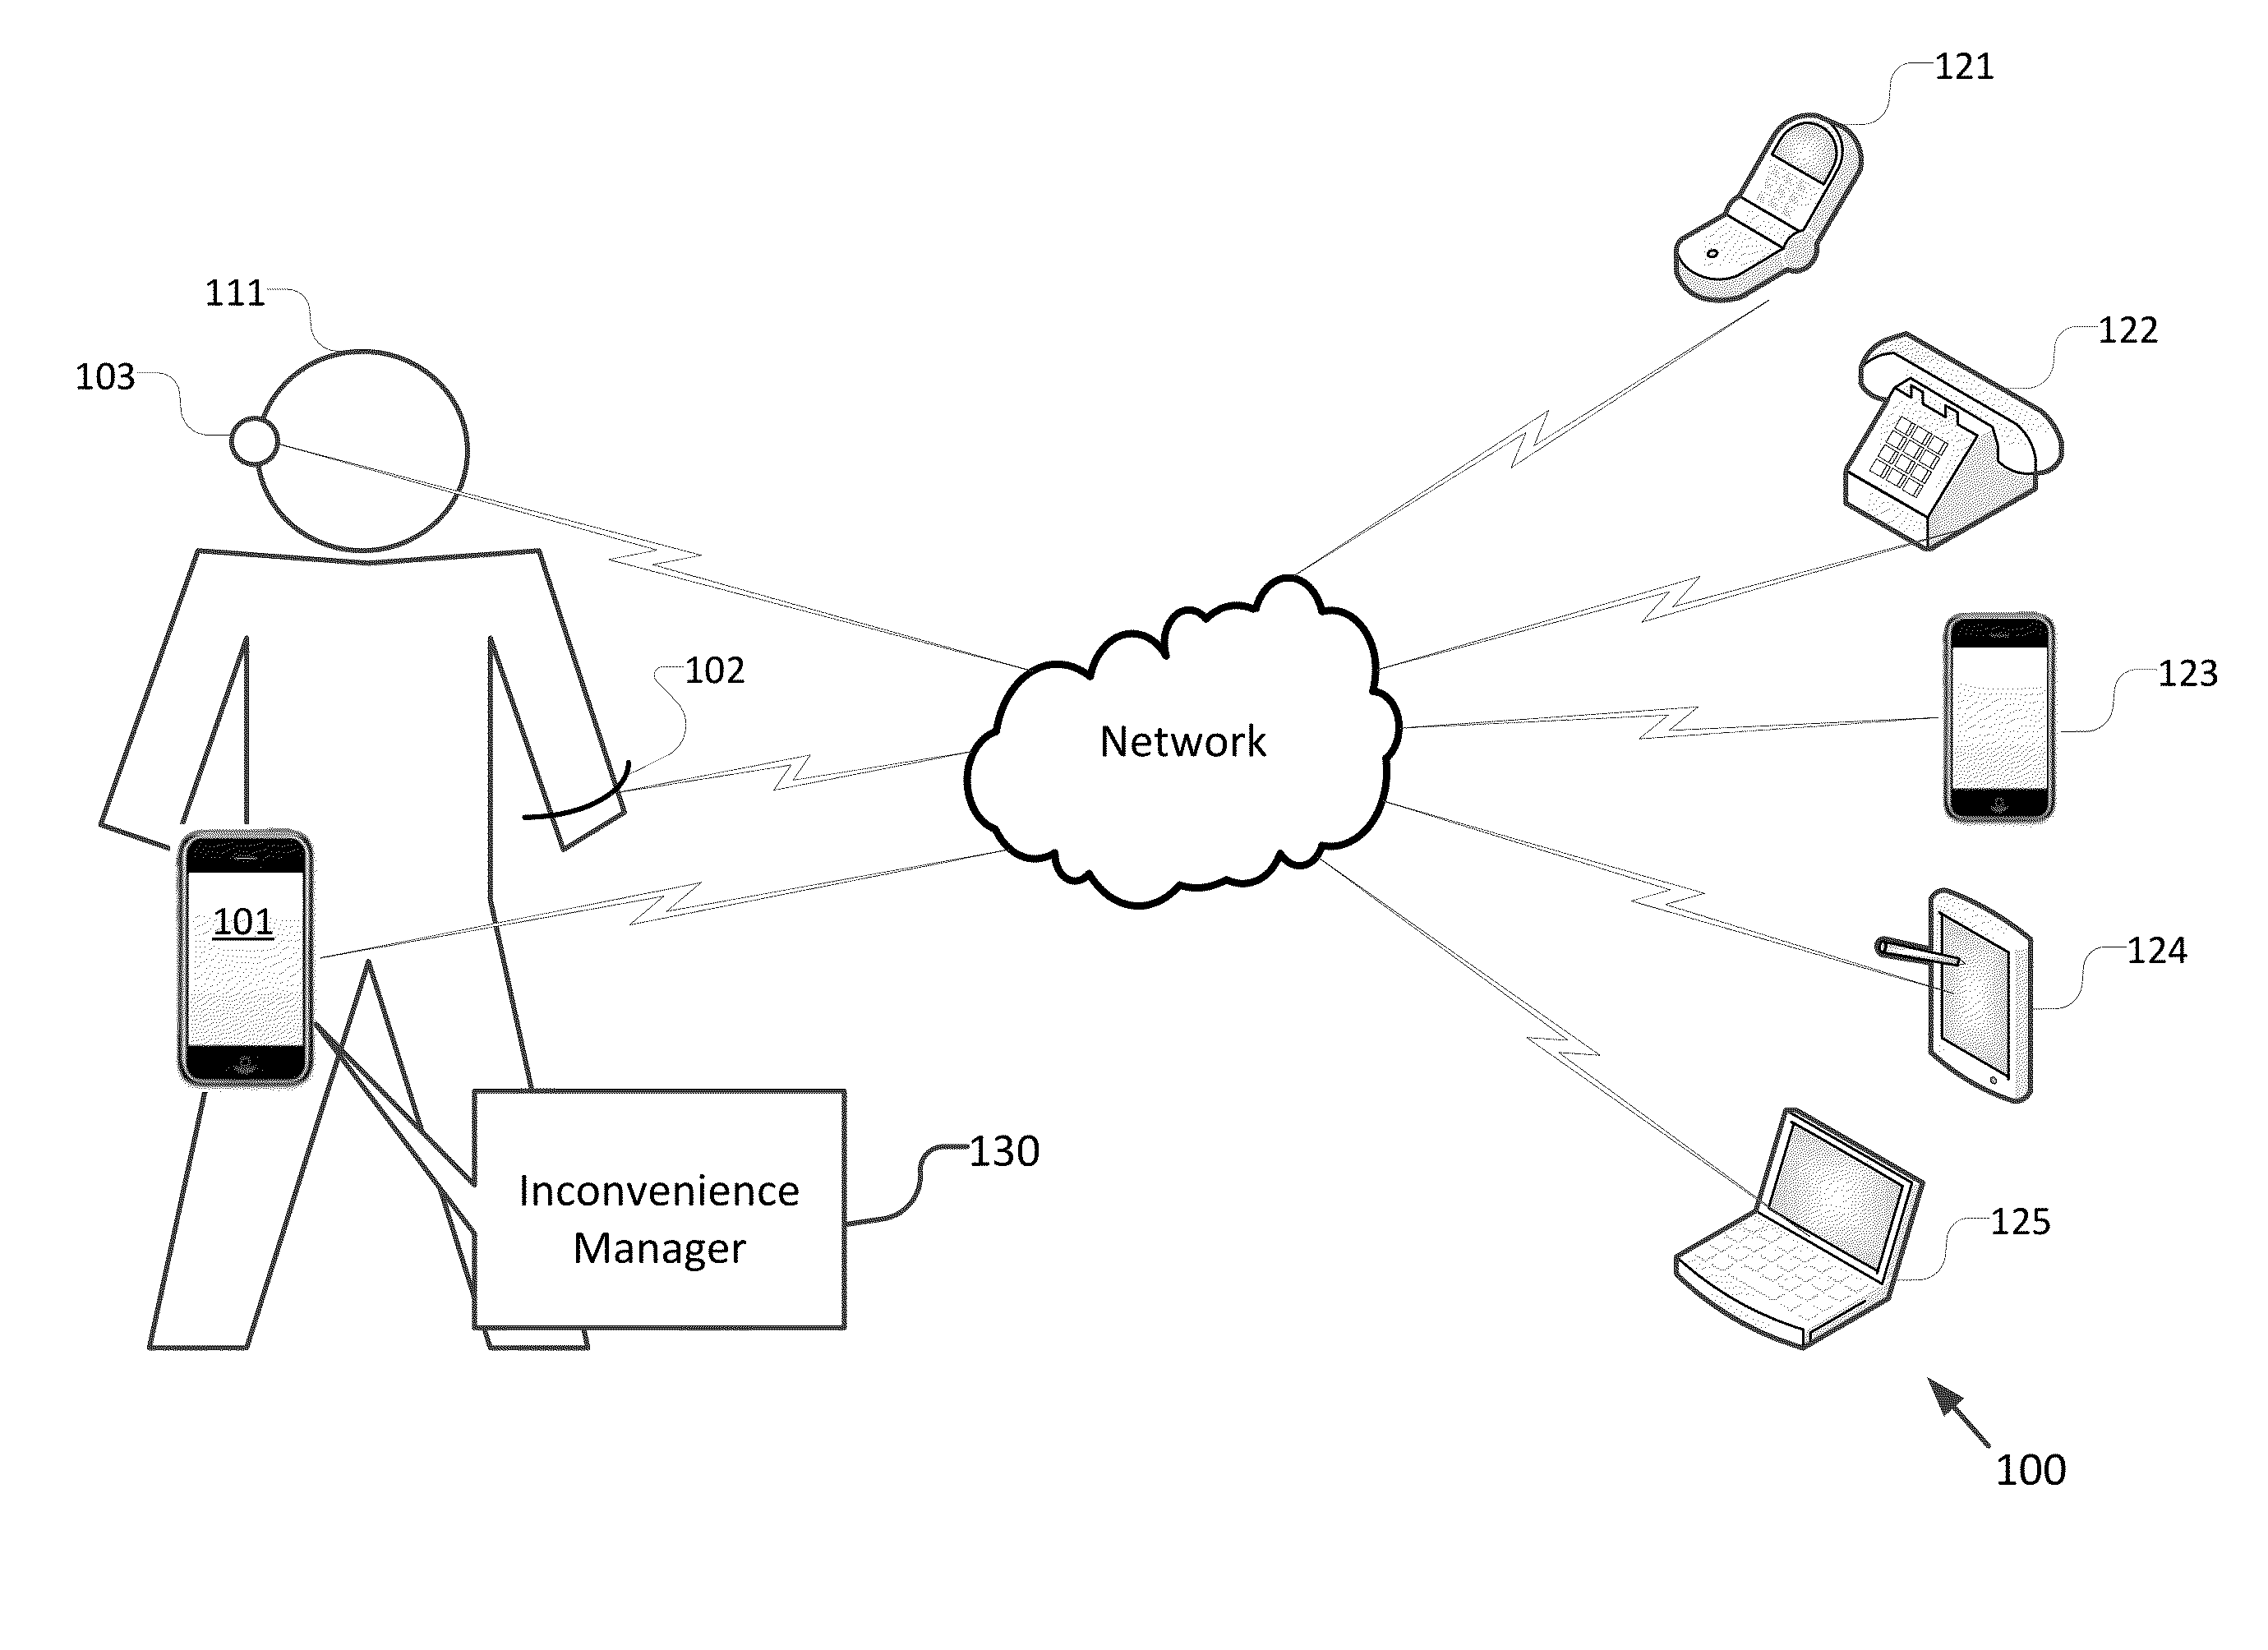 Communication management for periods of inconvenience on wearable devices